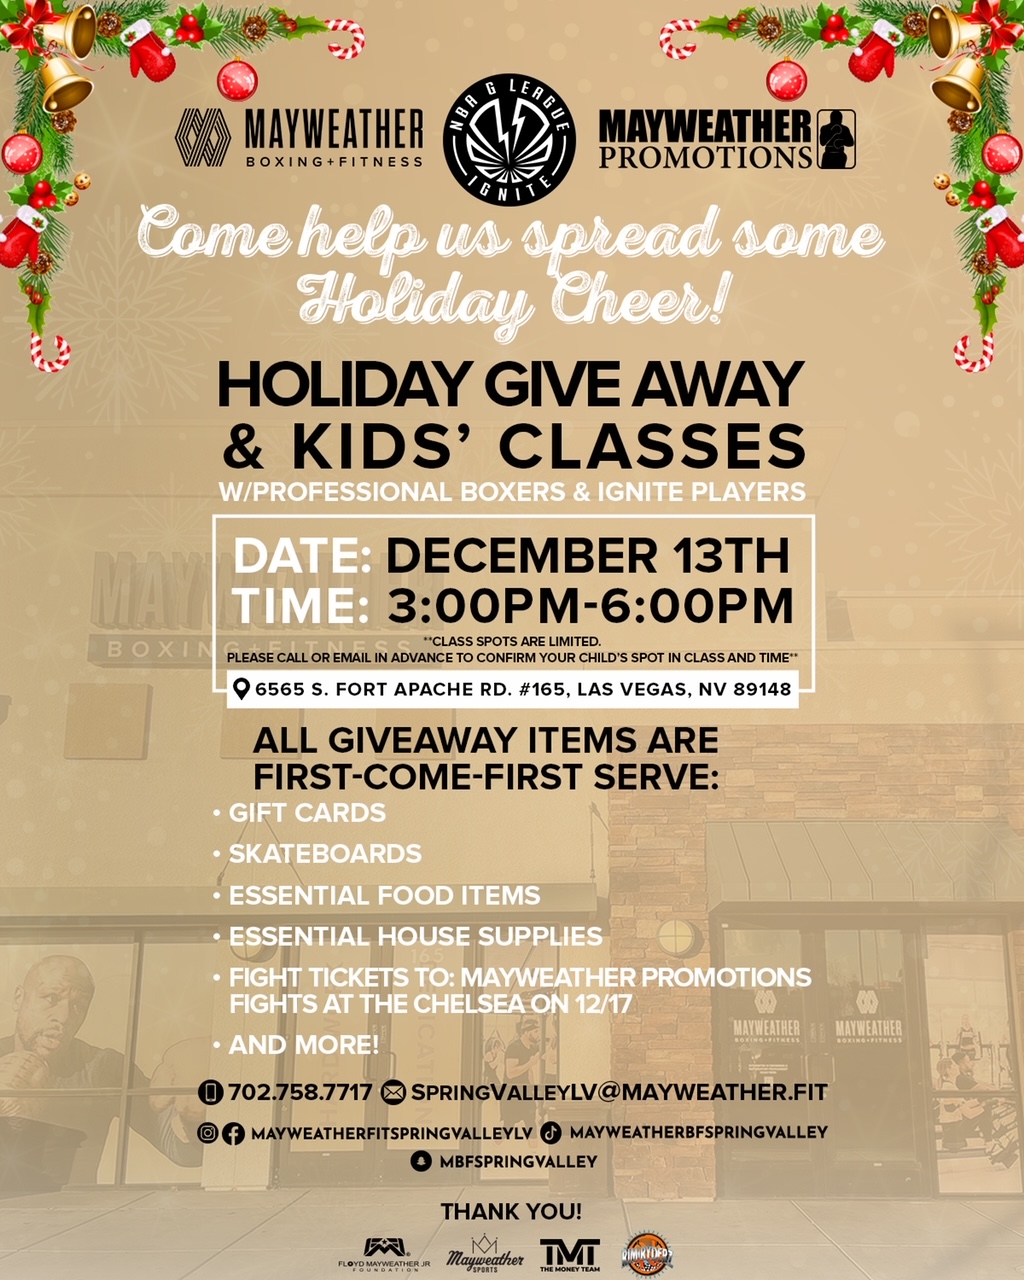 MAYWEATHER BOXING + FITNESS SPRING VALLEY LV PARTNERS WITH MAYWEATHER PROMOTIONS AND NBA G LEAGUE IGNITE PLAYERS TO SPREAD SOME HOLIDAY CHEER!